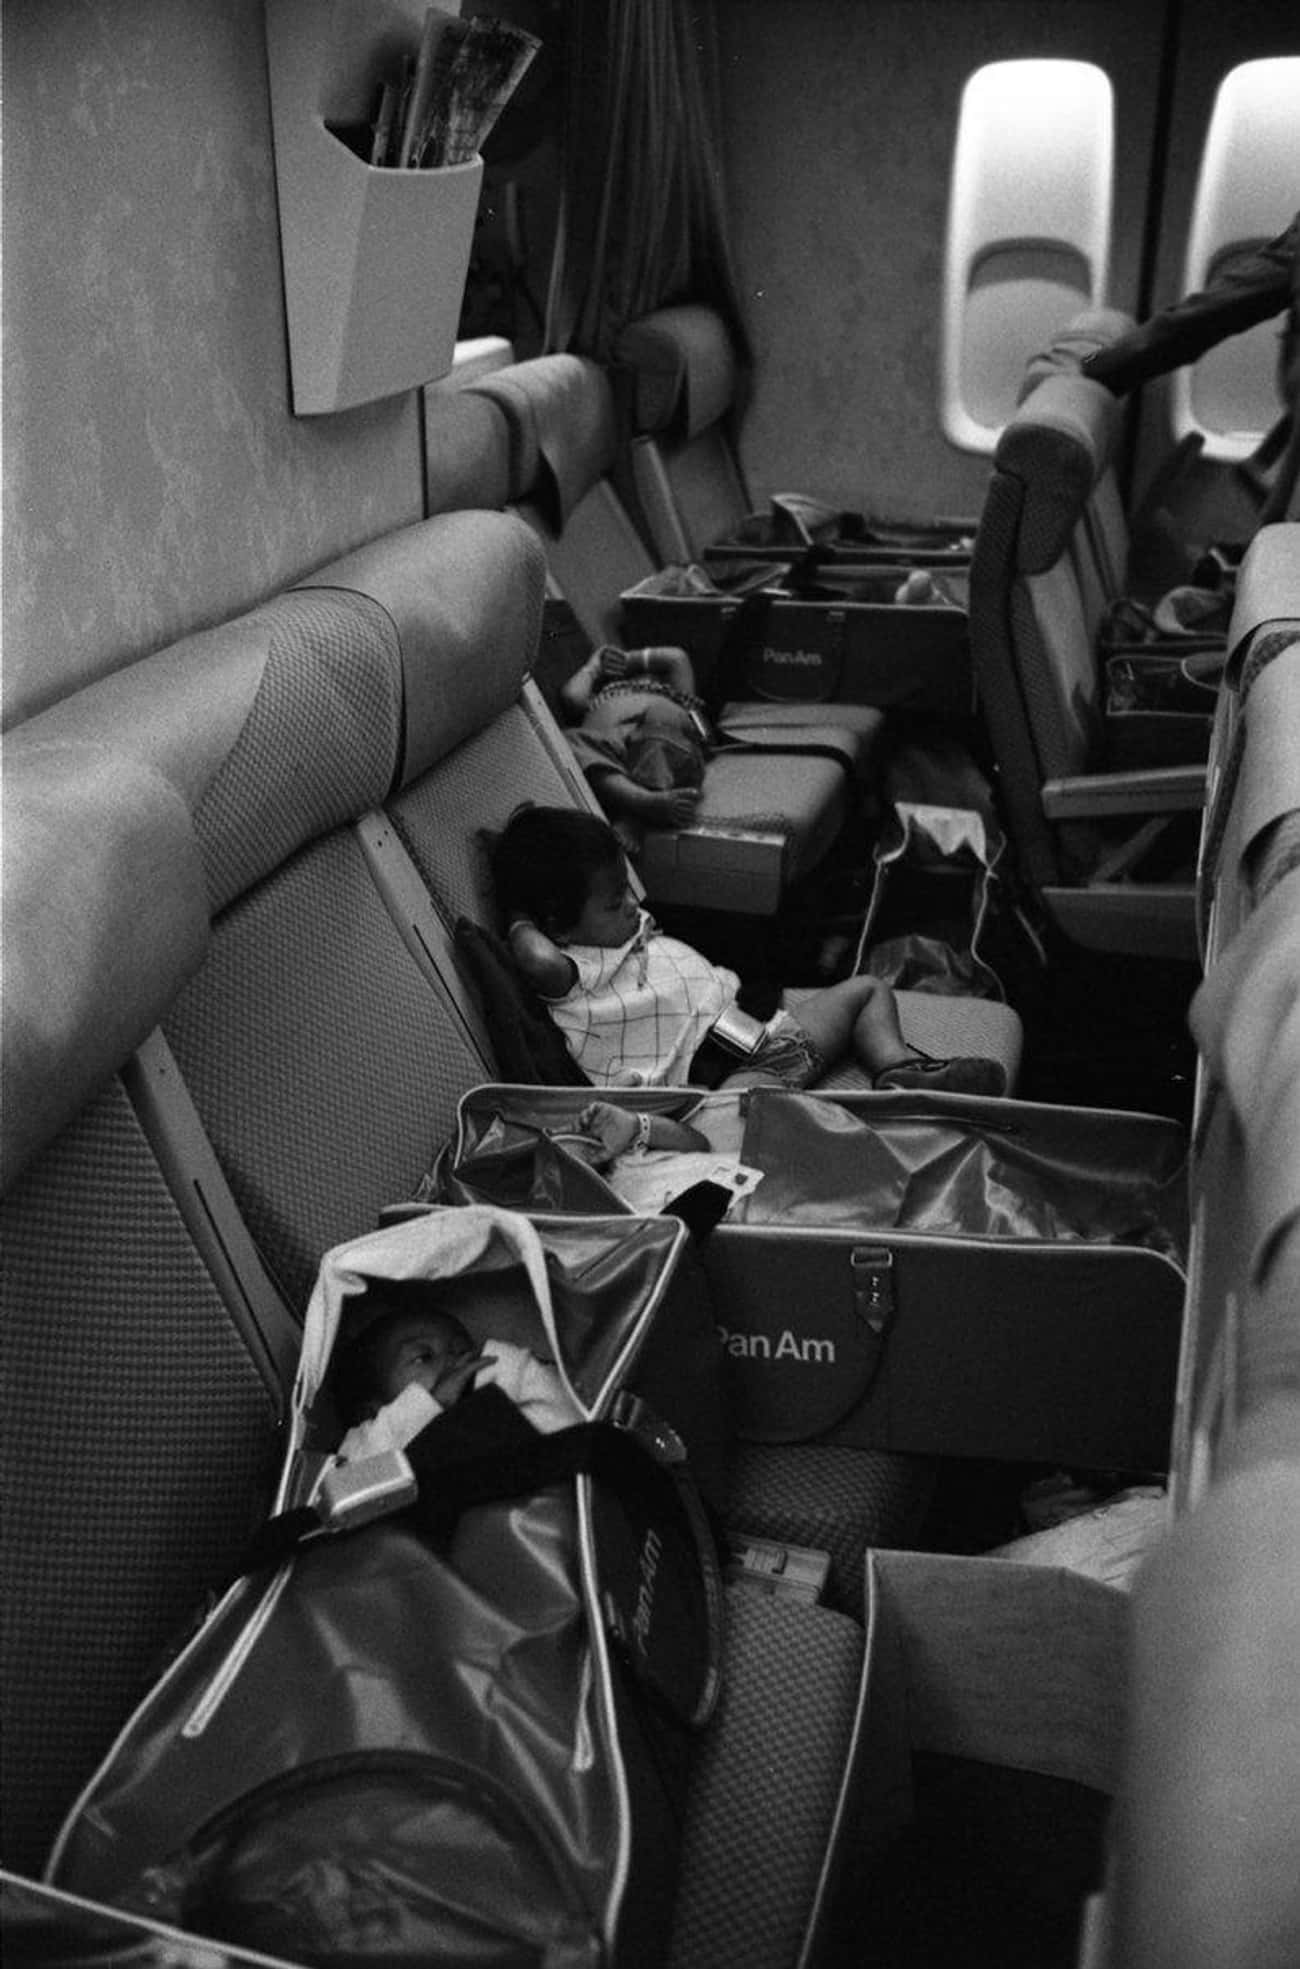 The Planes Were Filled With Over Twice The Amount Of Babies They Could Reasonably Carry